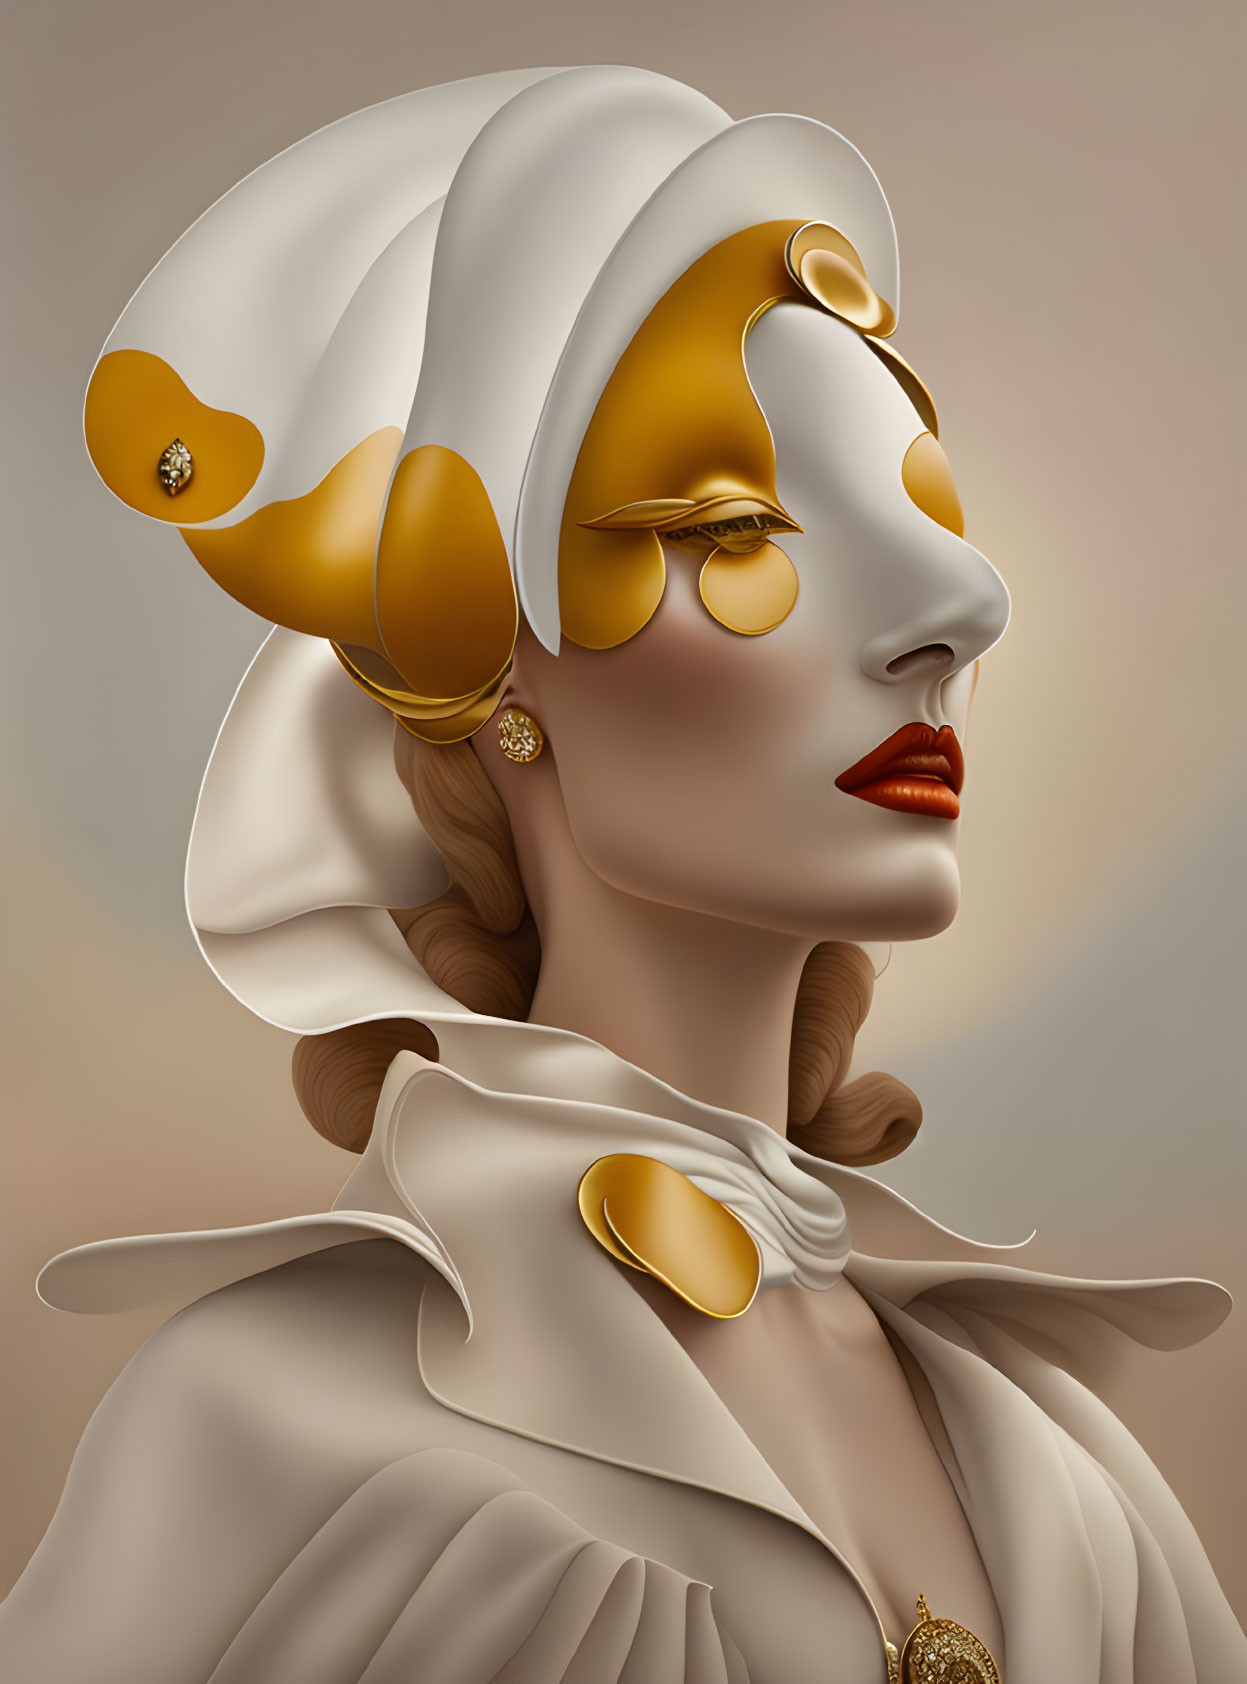 Digital portrait of woman in golden and white drapery with sculptural headdress